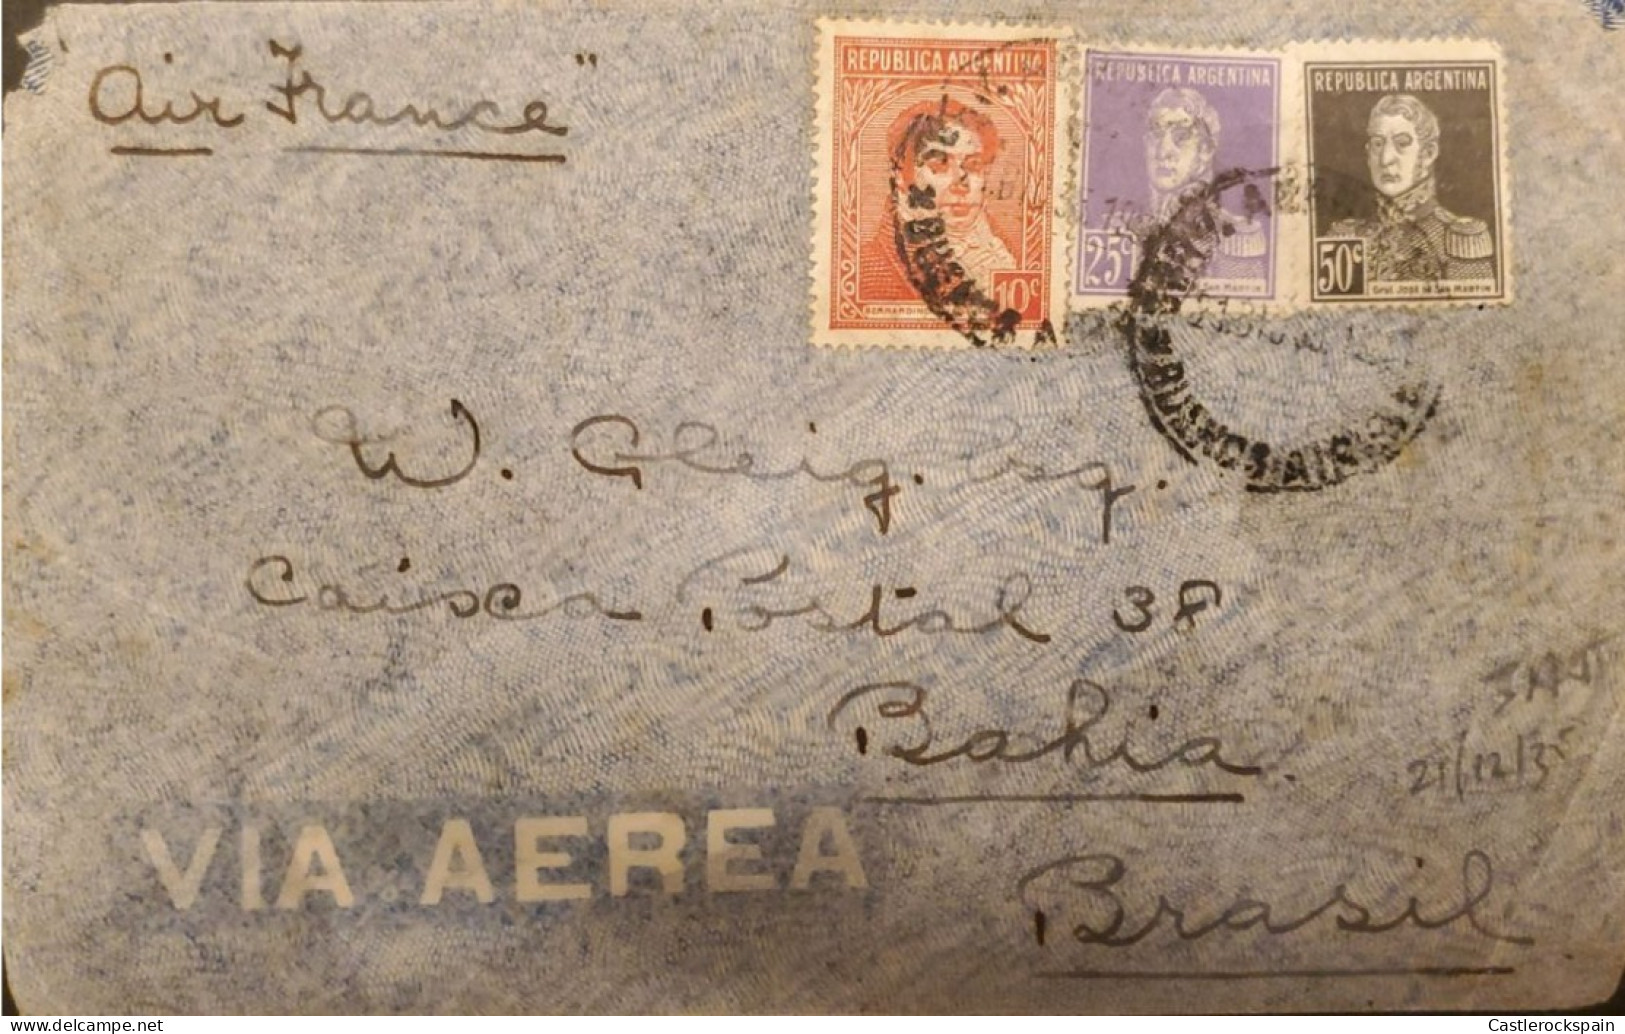 MI) 1935, ARGENTINA, AIR FRANCE, FROM BUENOS AIRES TO BAHIA - BRAZIL, AIR MAIL, GRAL SAN MARTIN AND RIVADAVIA STAMPS - Gebraucht